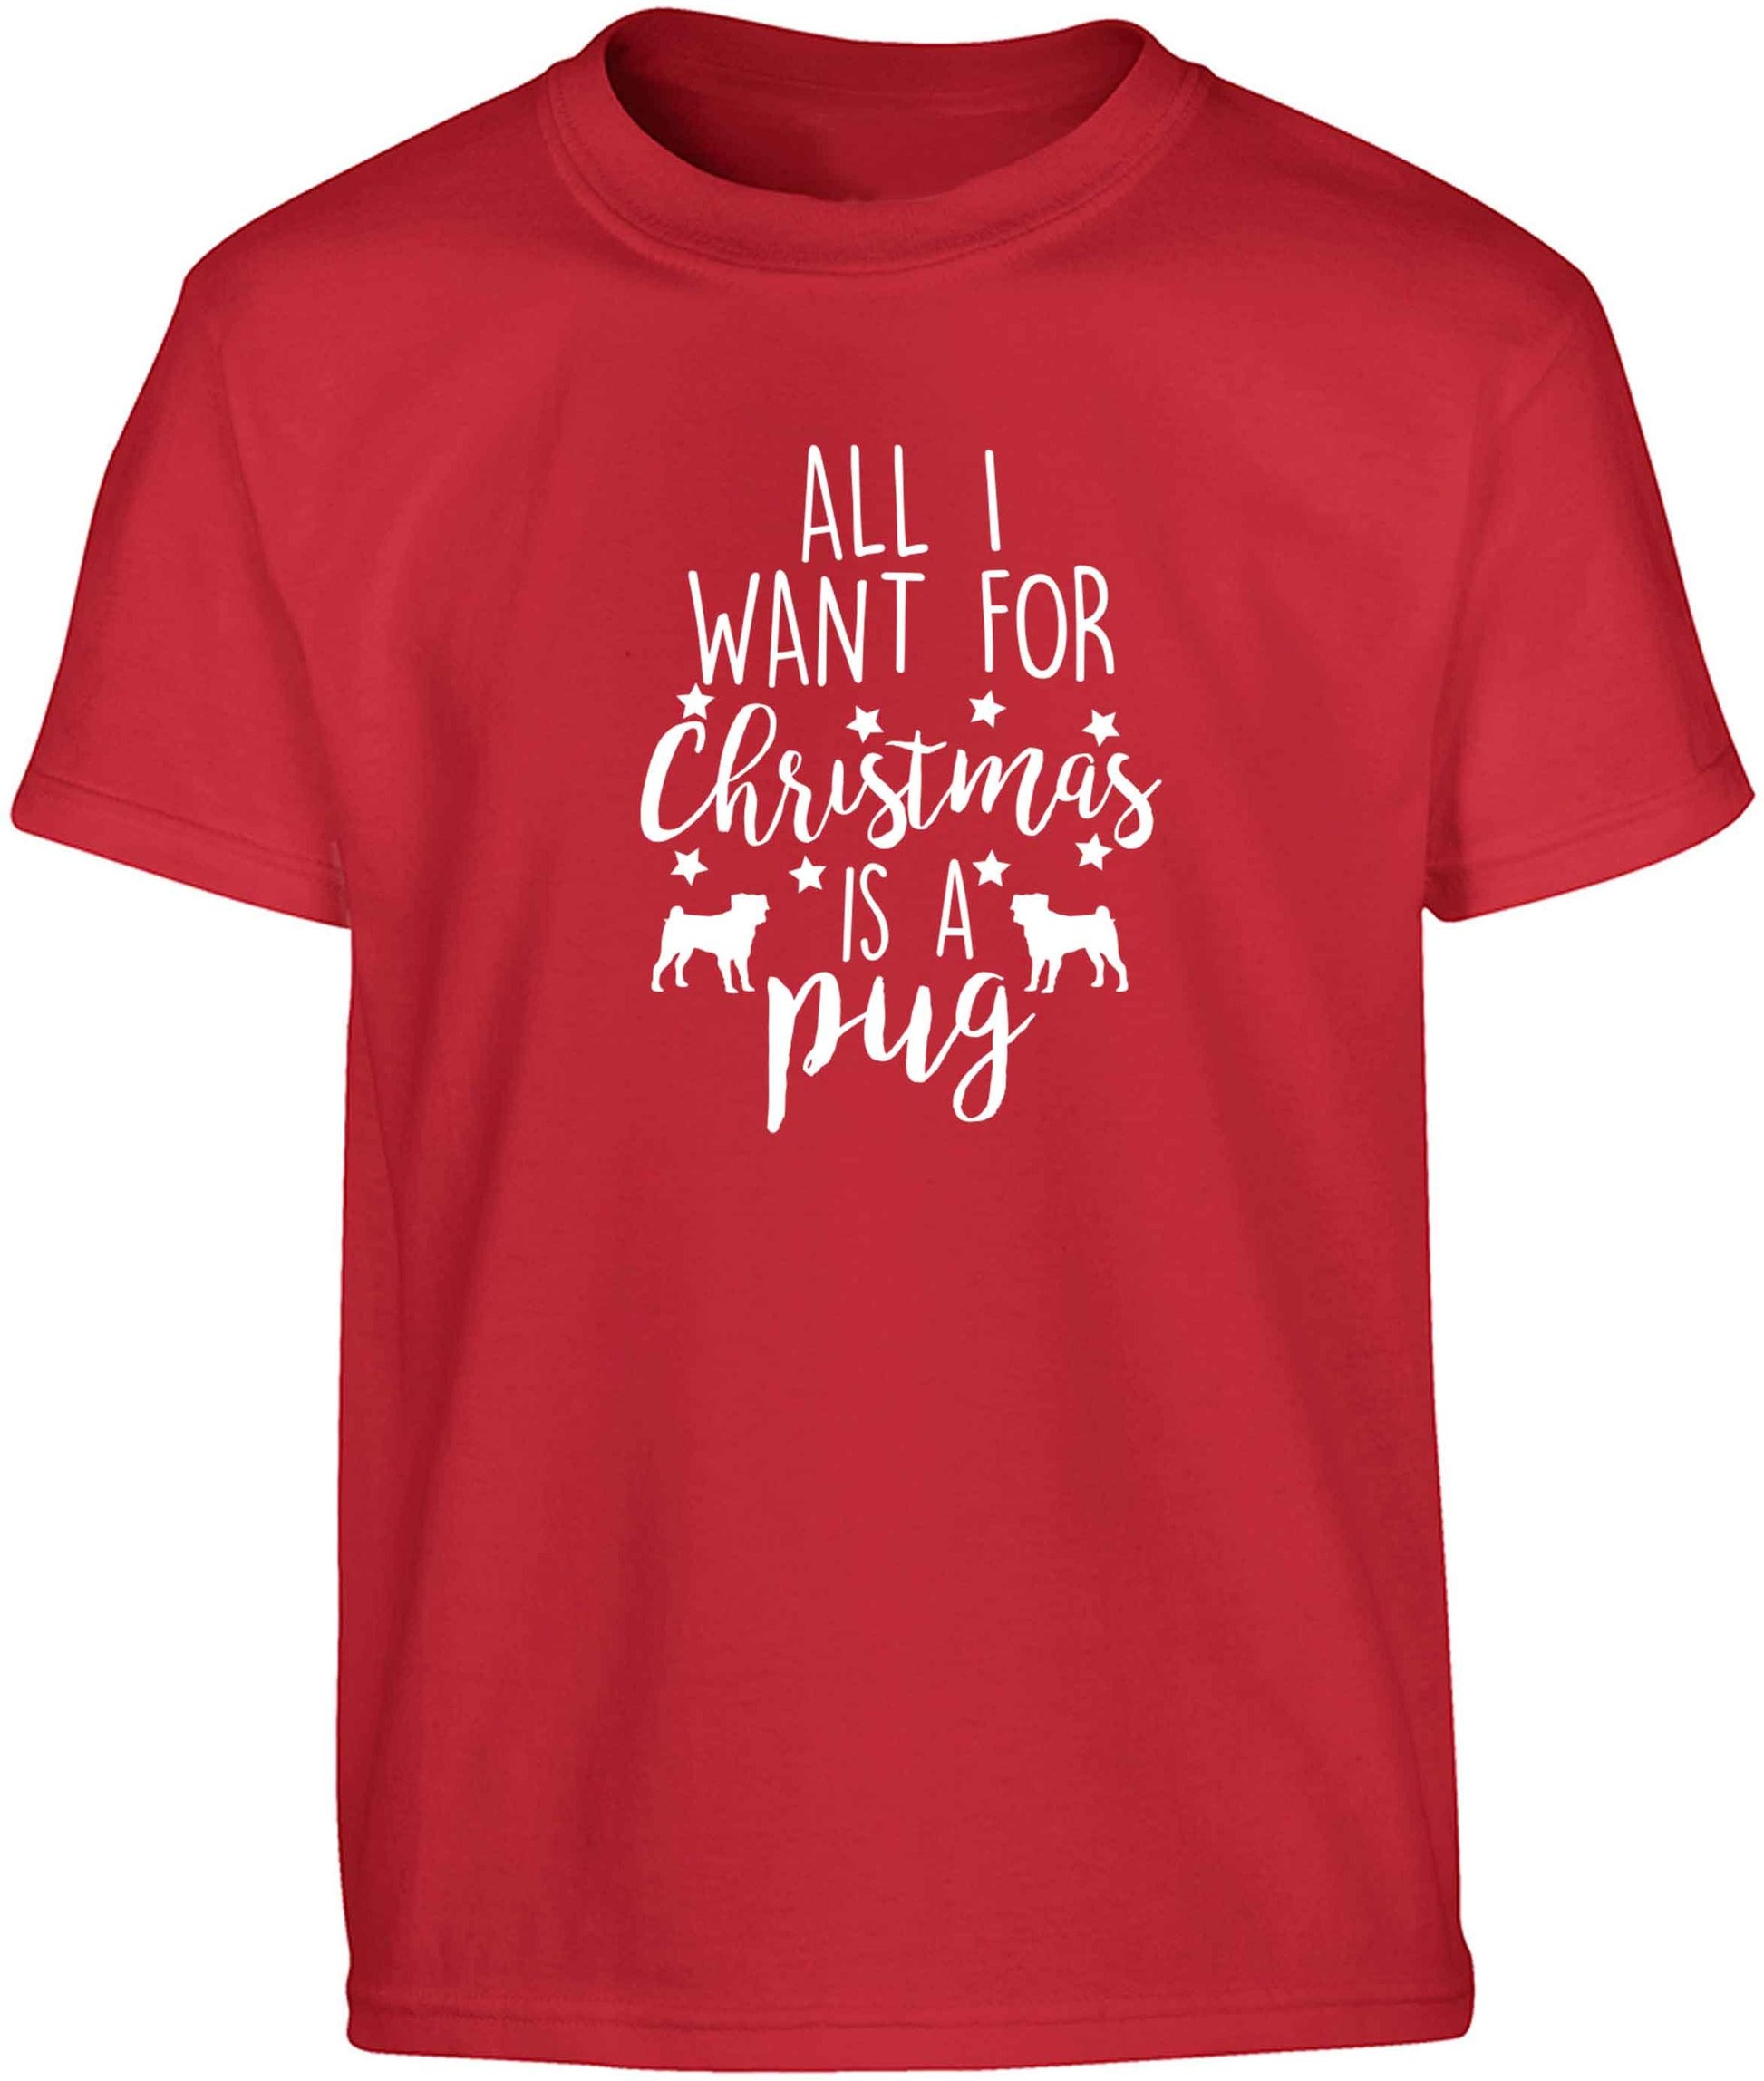 All I want for Christmas is a pug Children's red Tshirt 12-13 Years